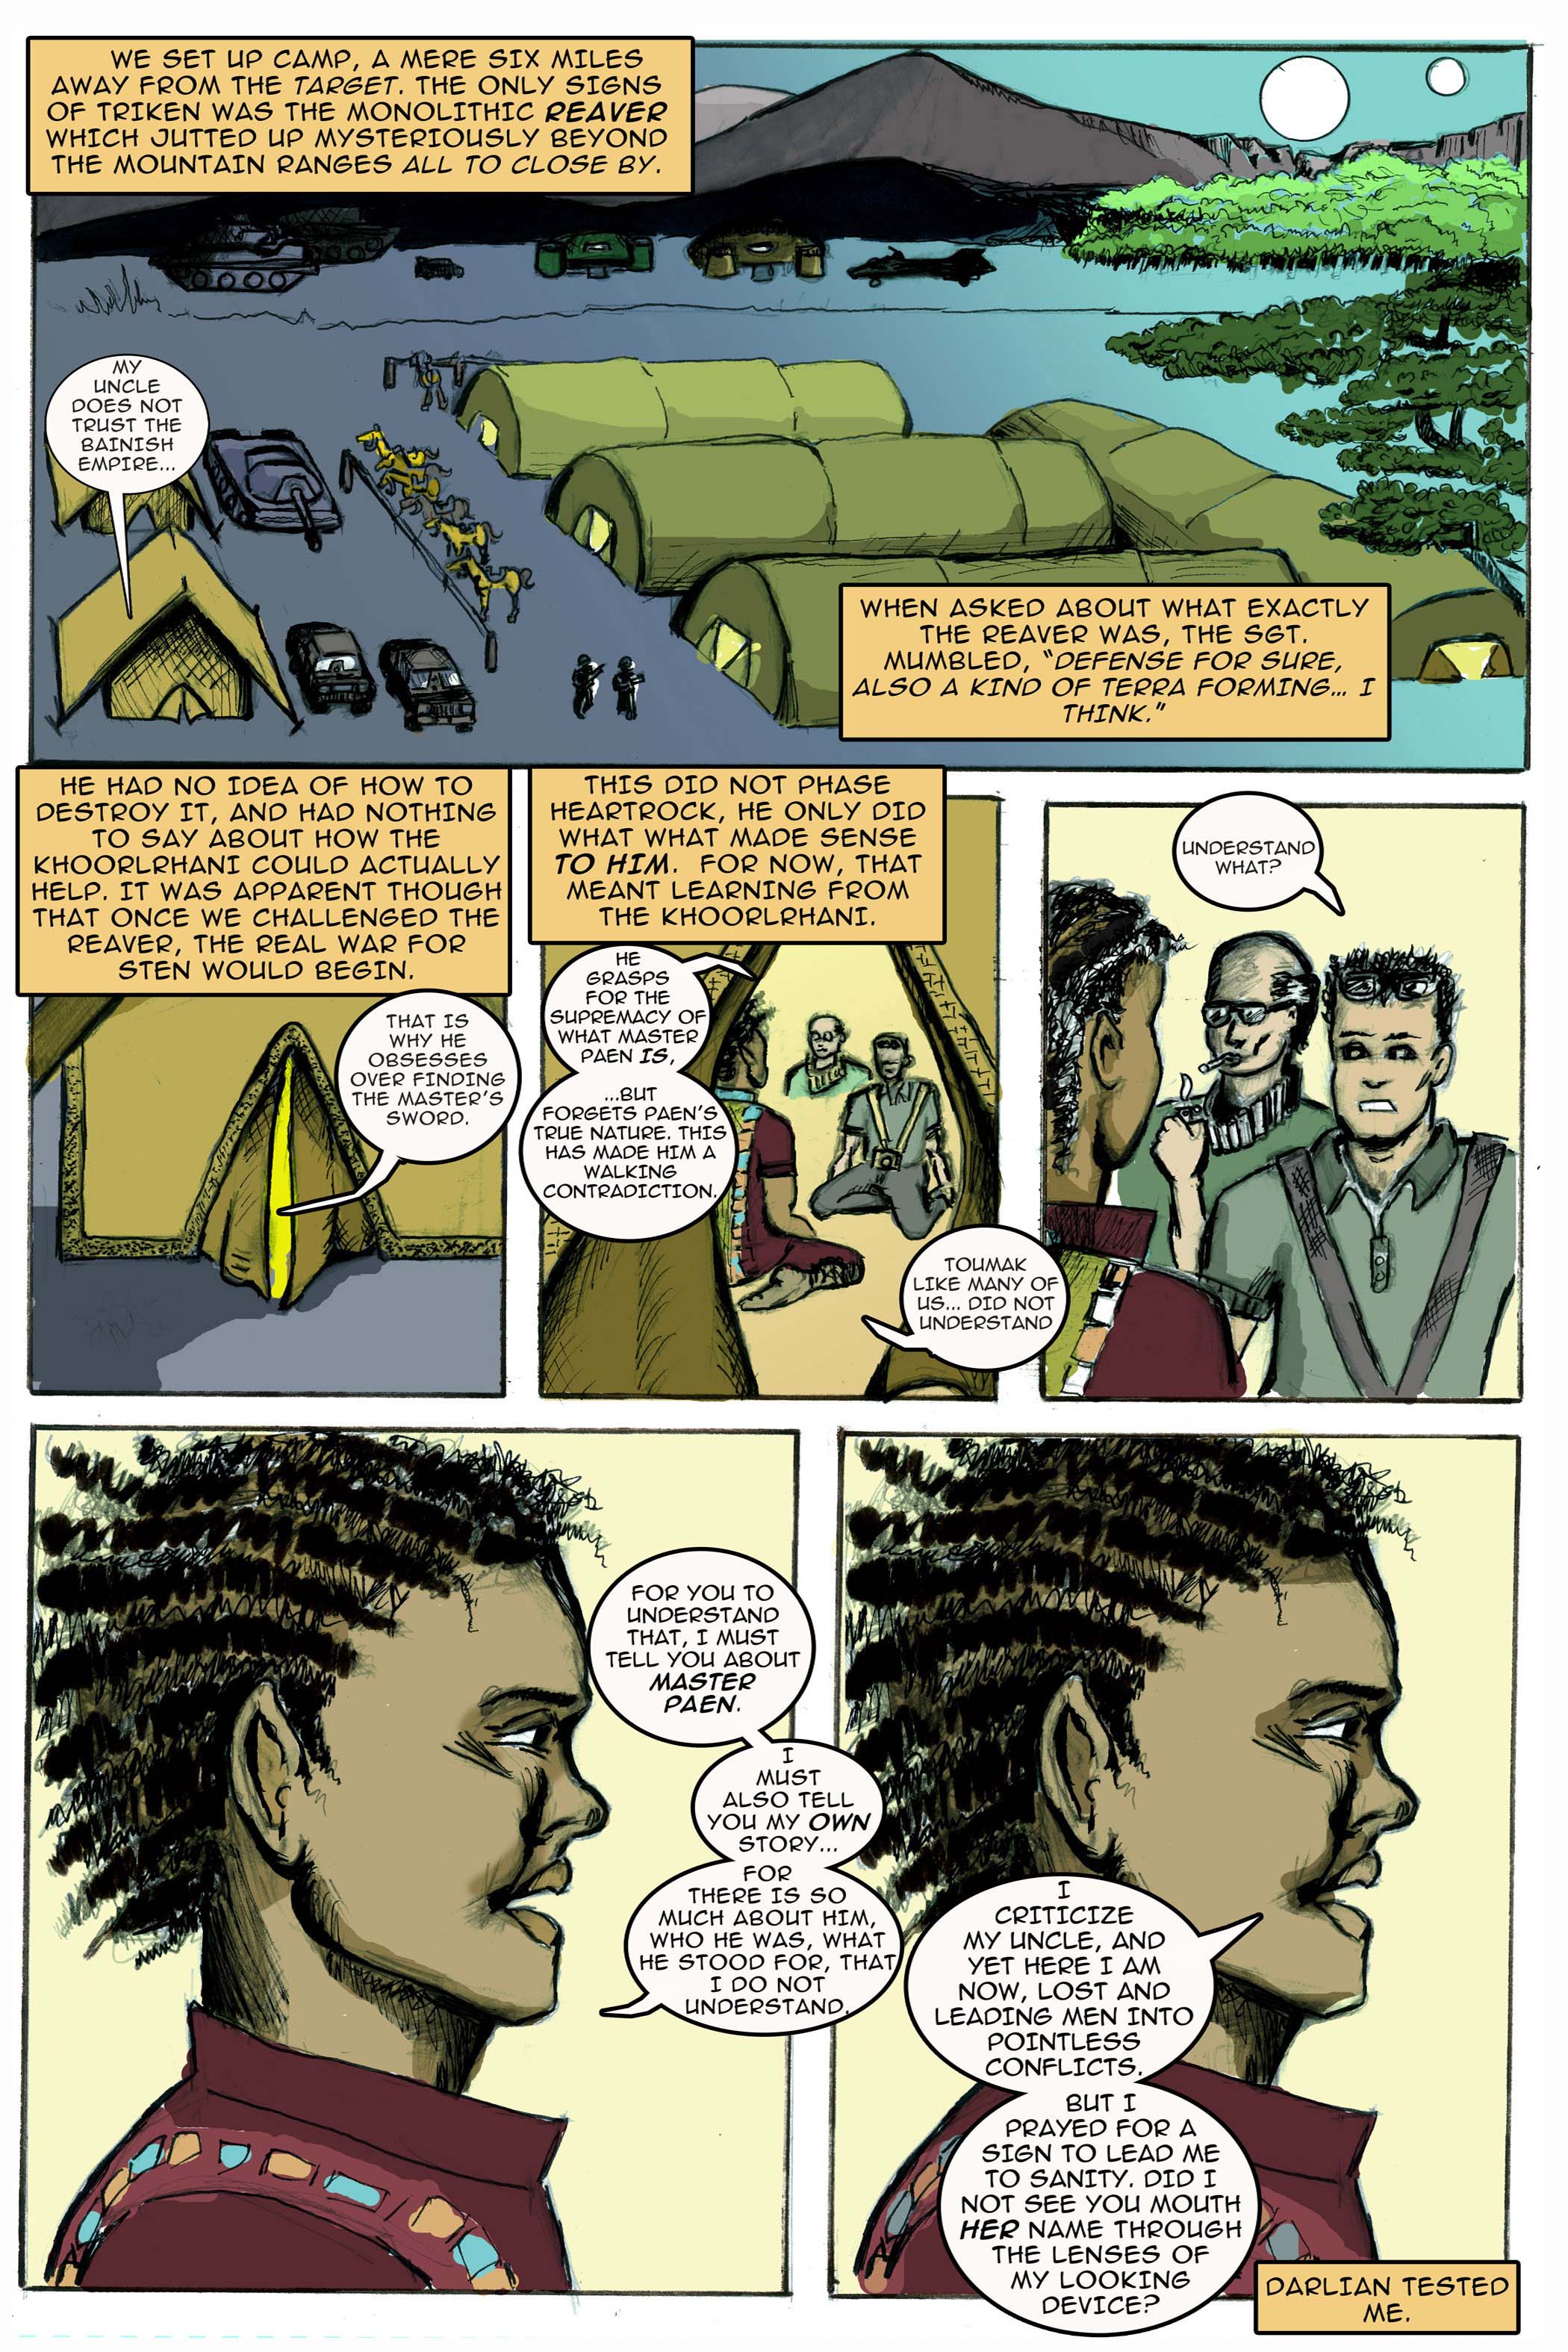 Dreamers of the Great One Land (page 8)